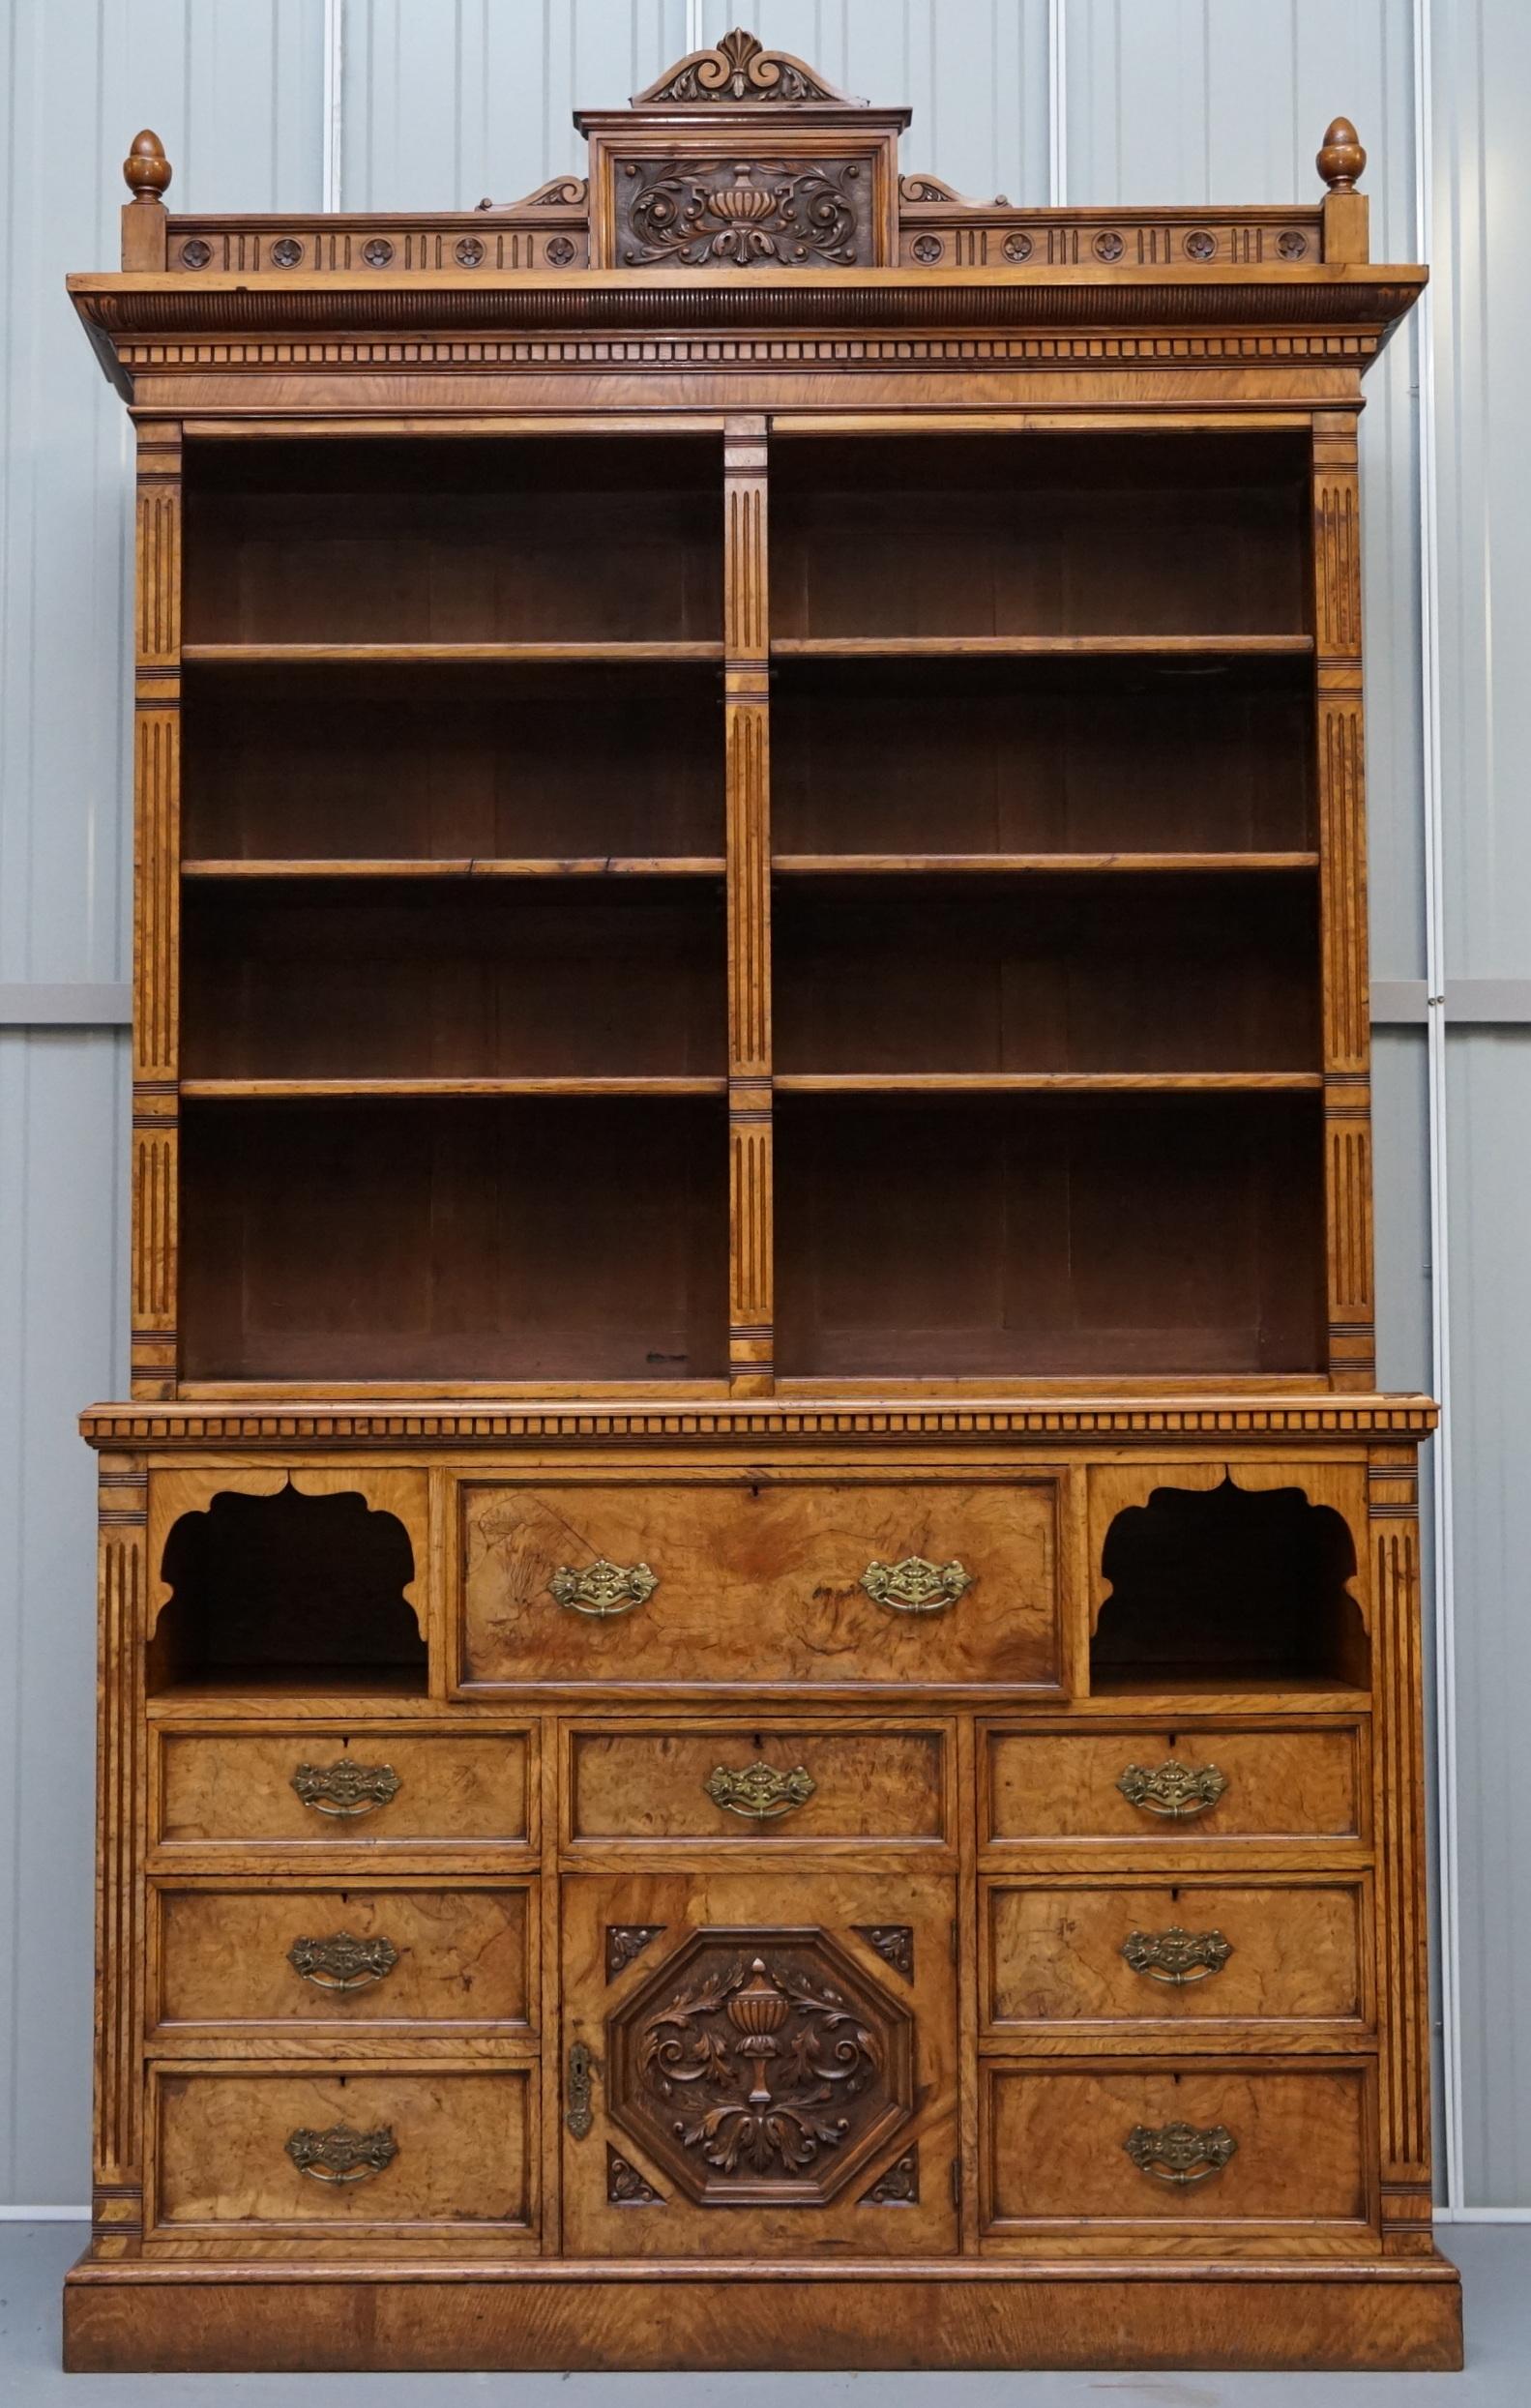 We are delighted to offer for sale this stunning and very rare John Reid & Sons Victorian Library bookcase in Pollard Burr oak with oxblood leather drop front secretaire desk

A very good looking and rare piece, pollard oak is highly collectable